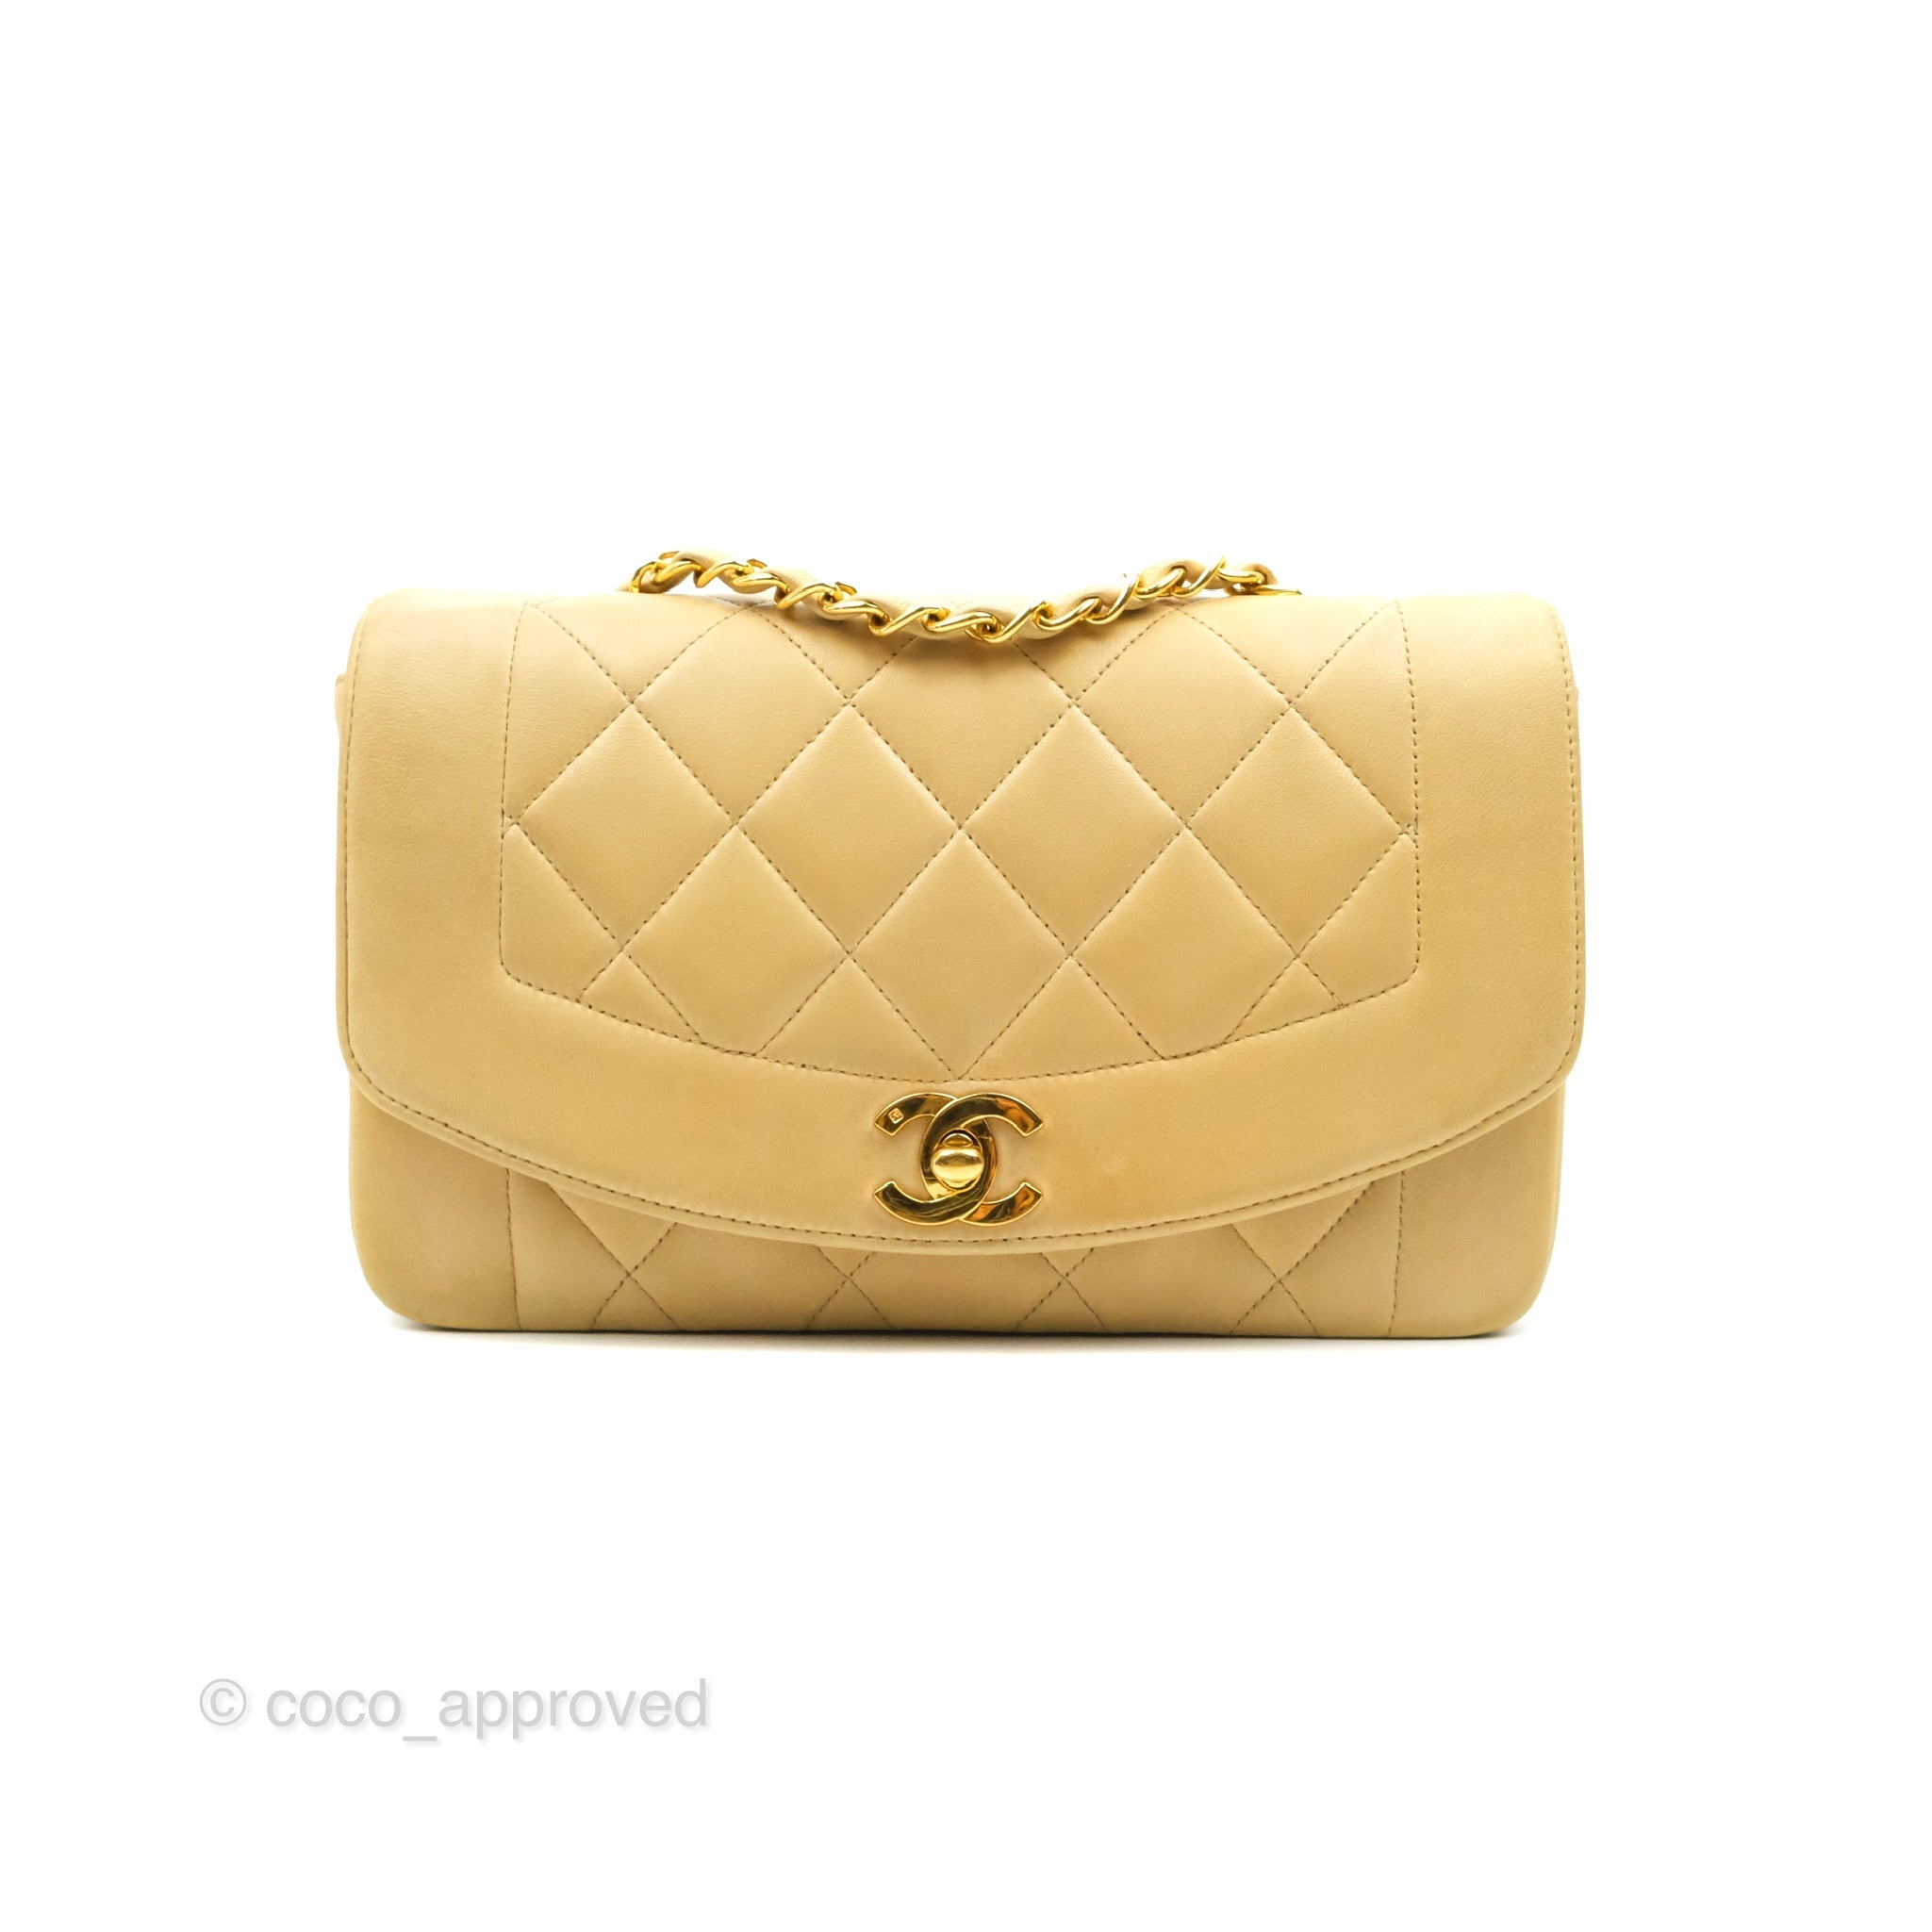 Chanel Small Vintage Quilted Classic Diana Flap Bag Beige Lambskin